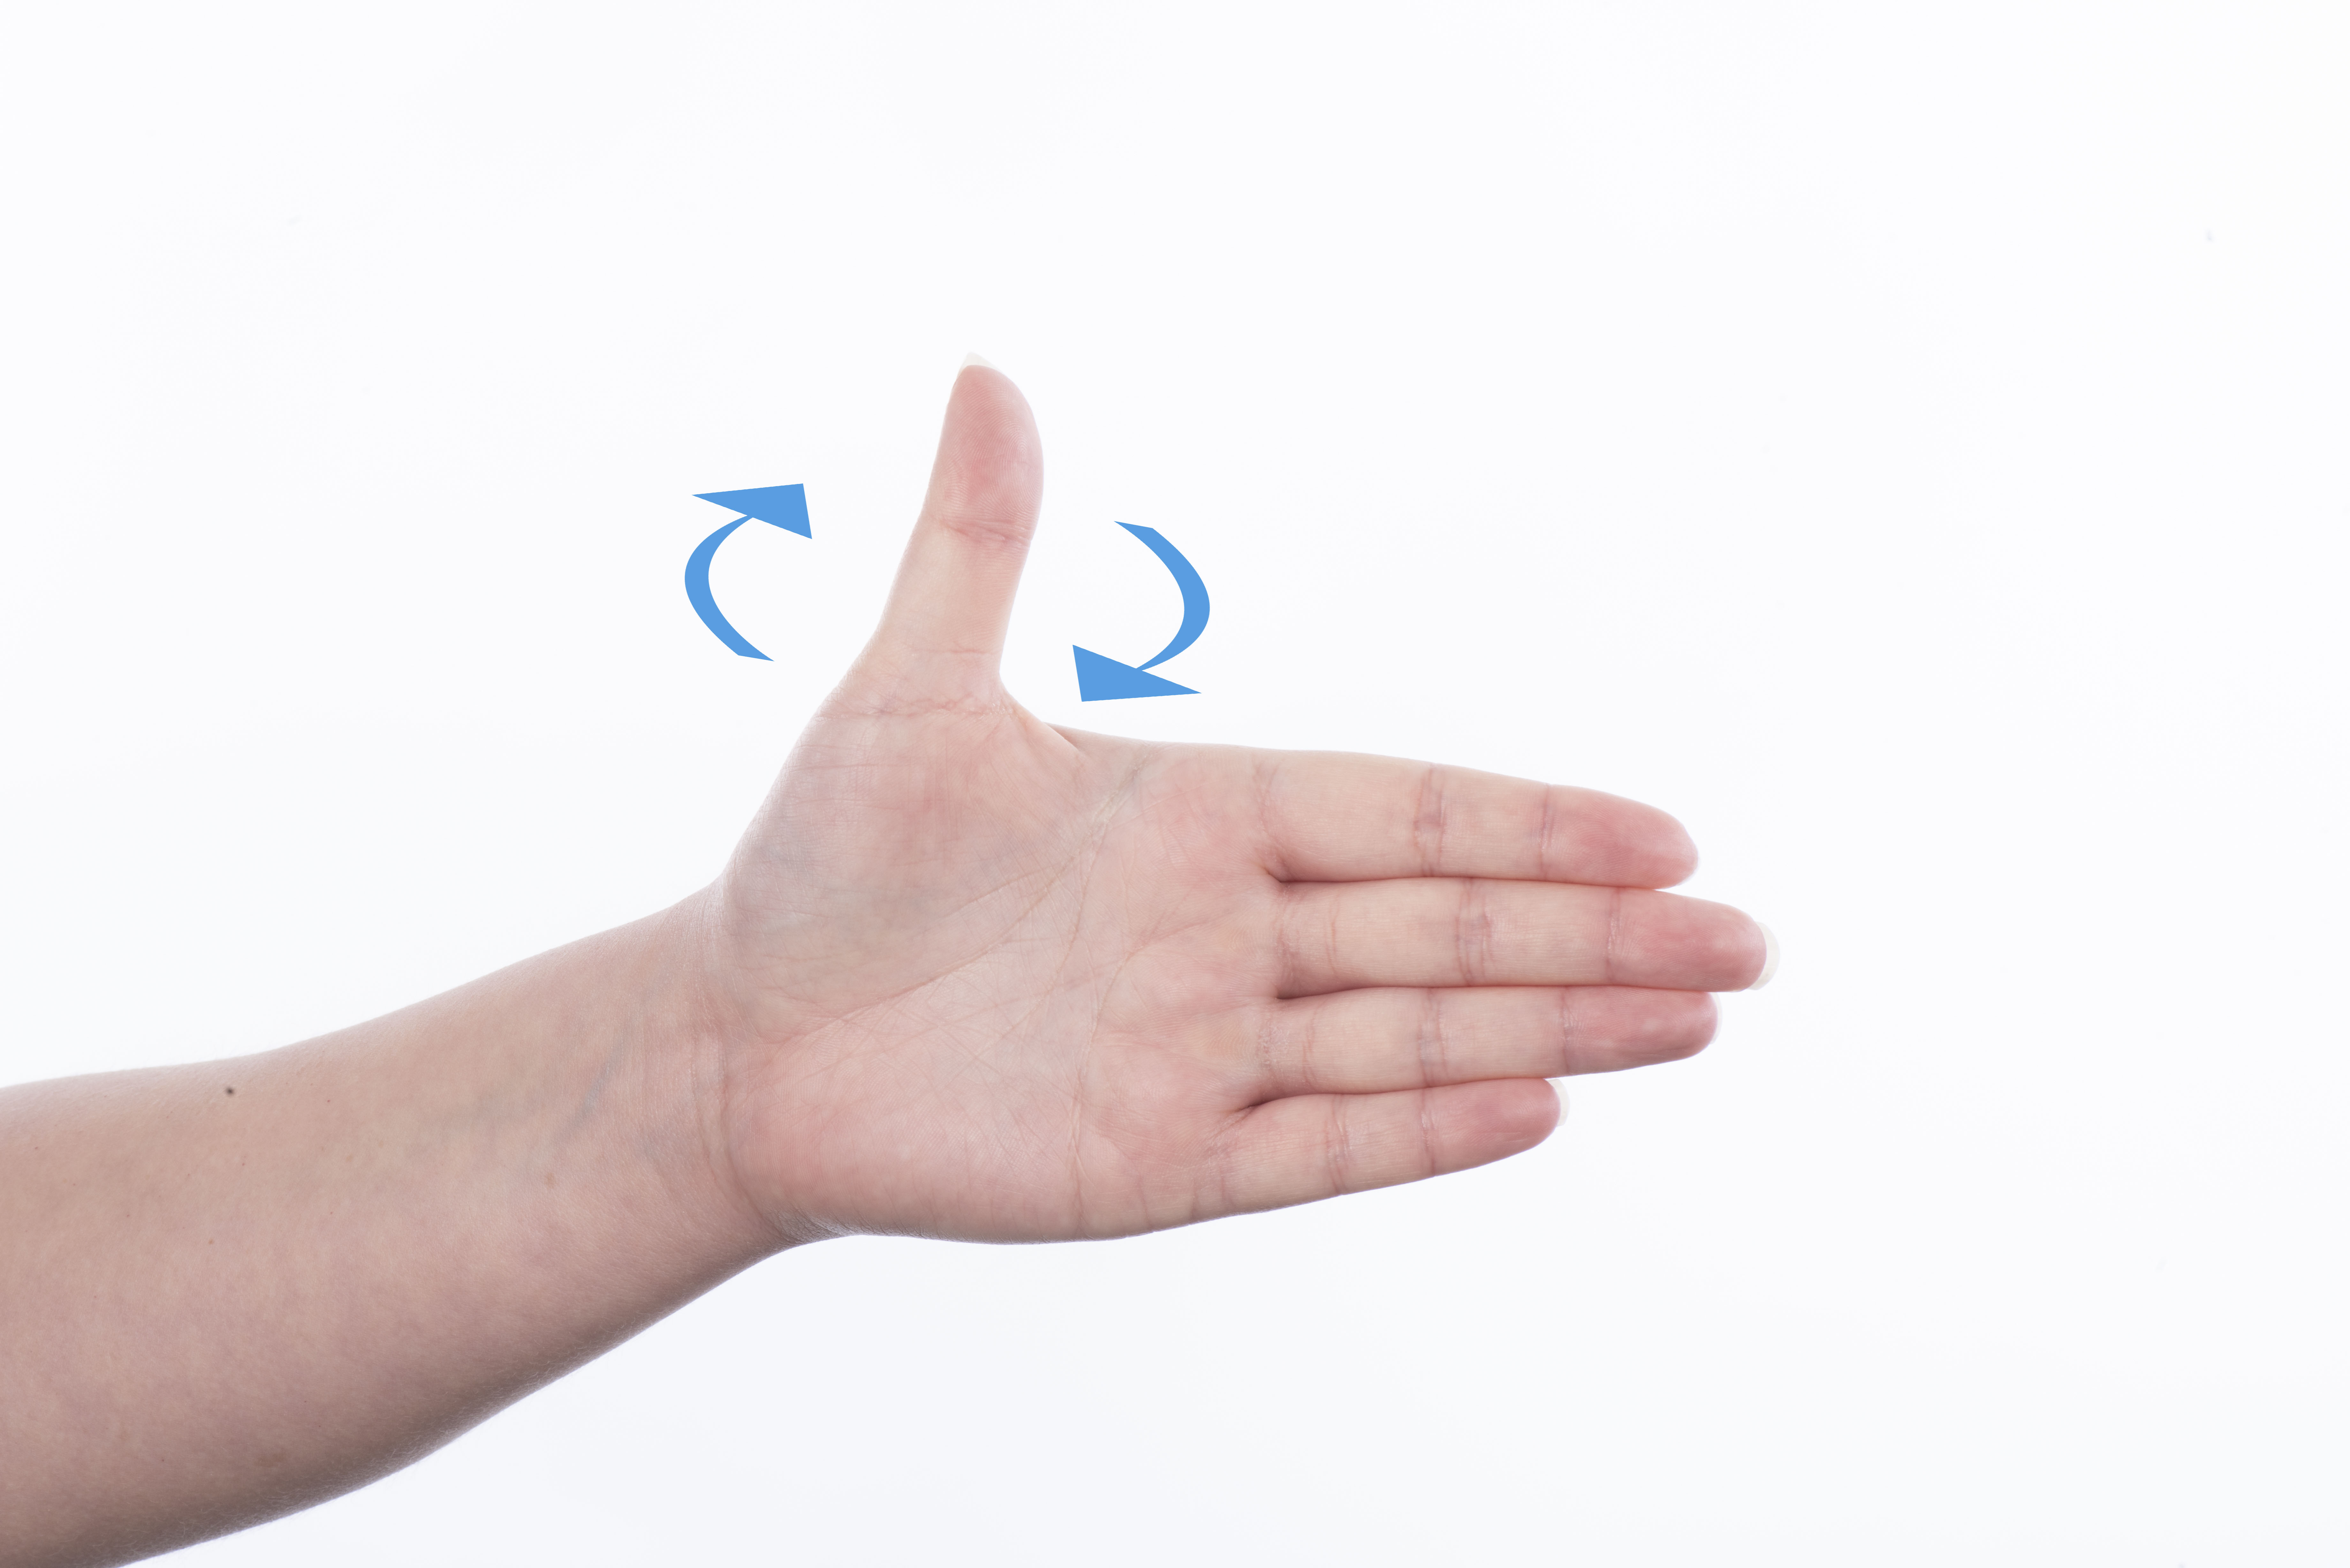 Move your thumb around in circles, clockwise and anticlockwise. Try to make the circles as big as is comfortable.